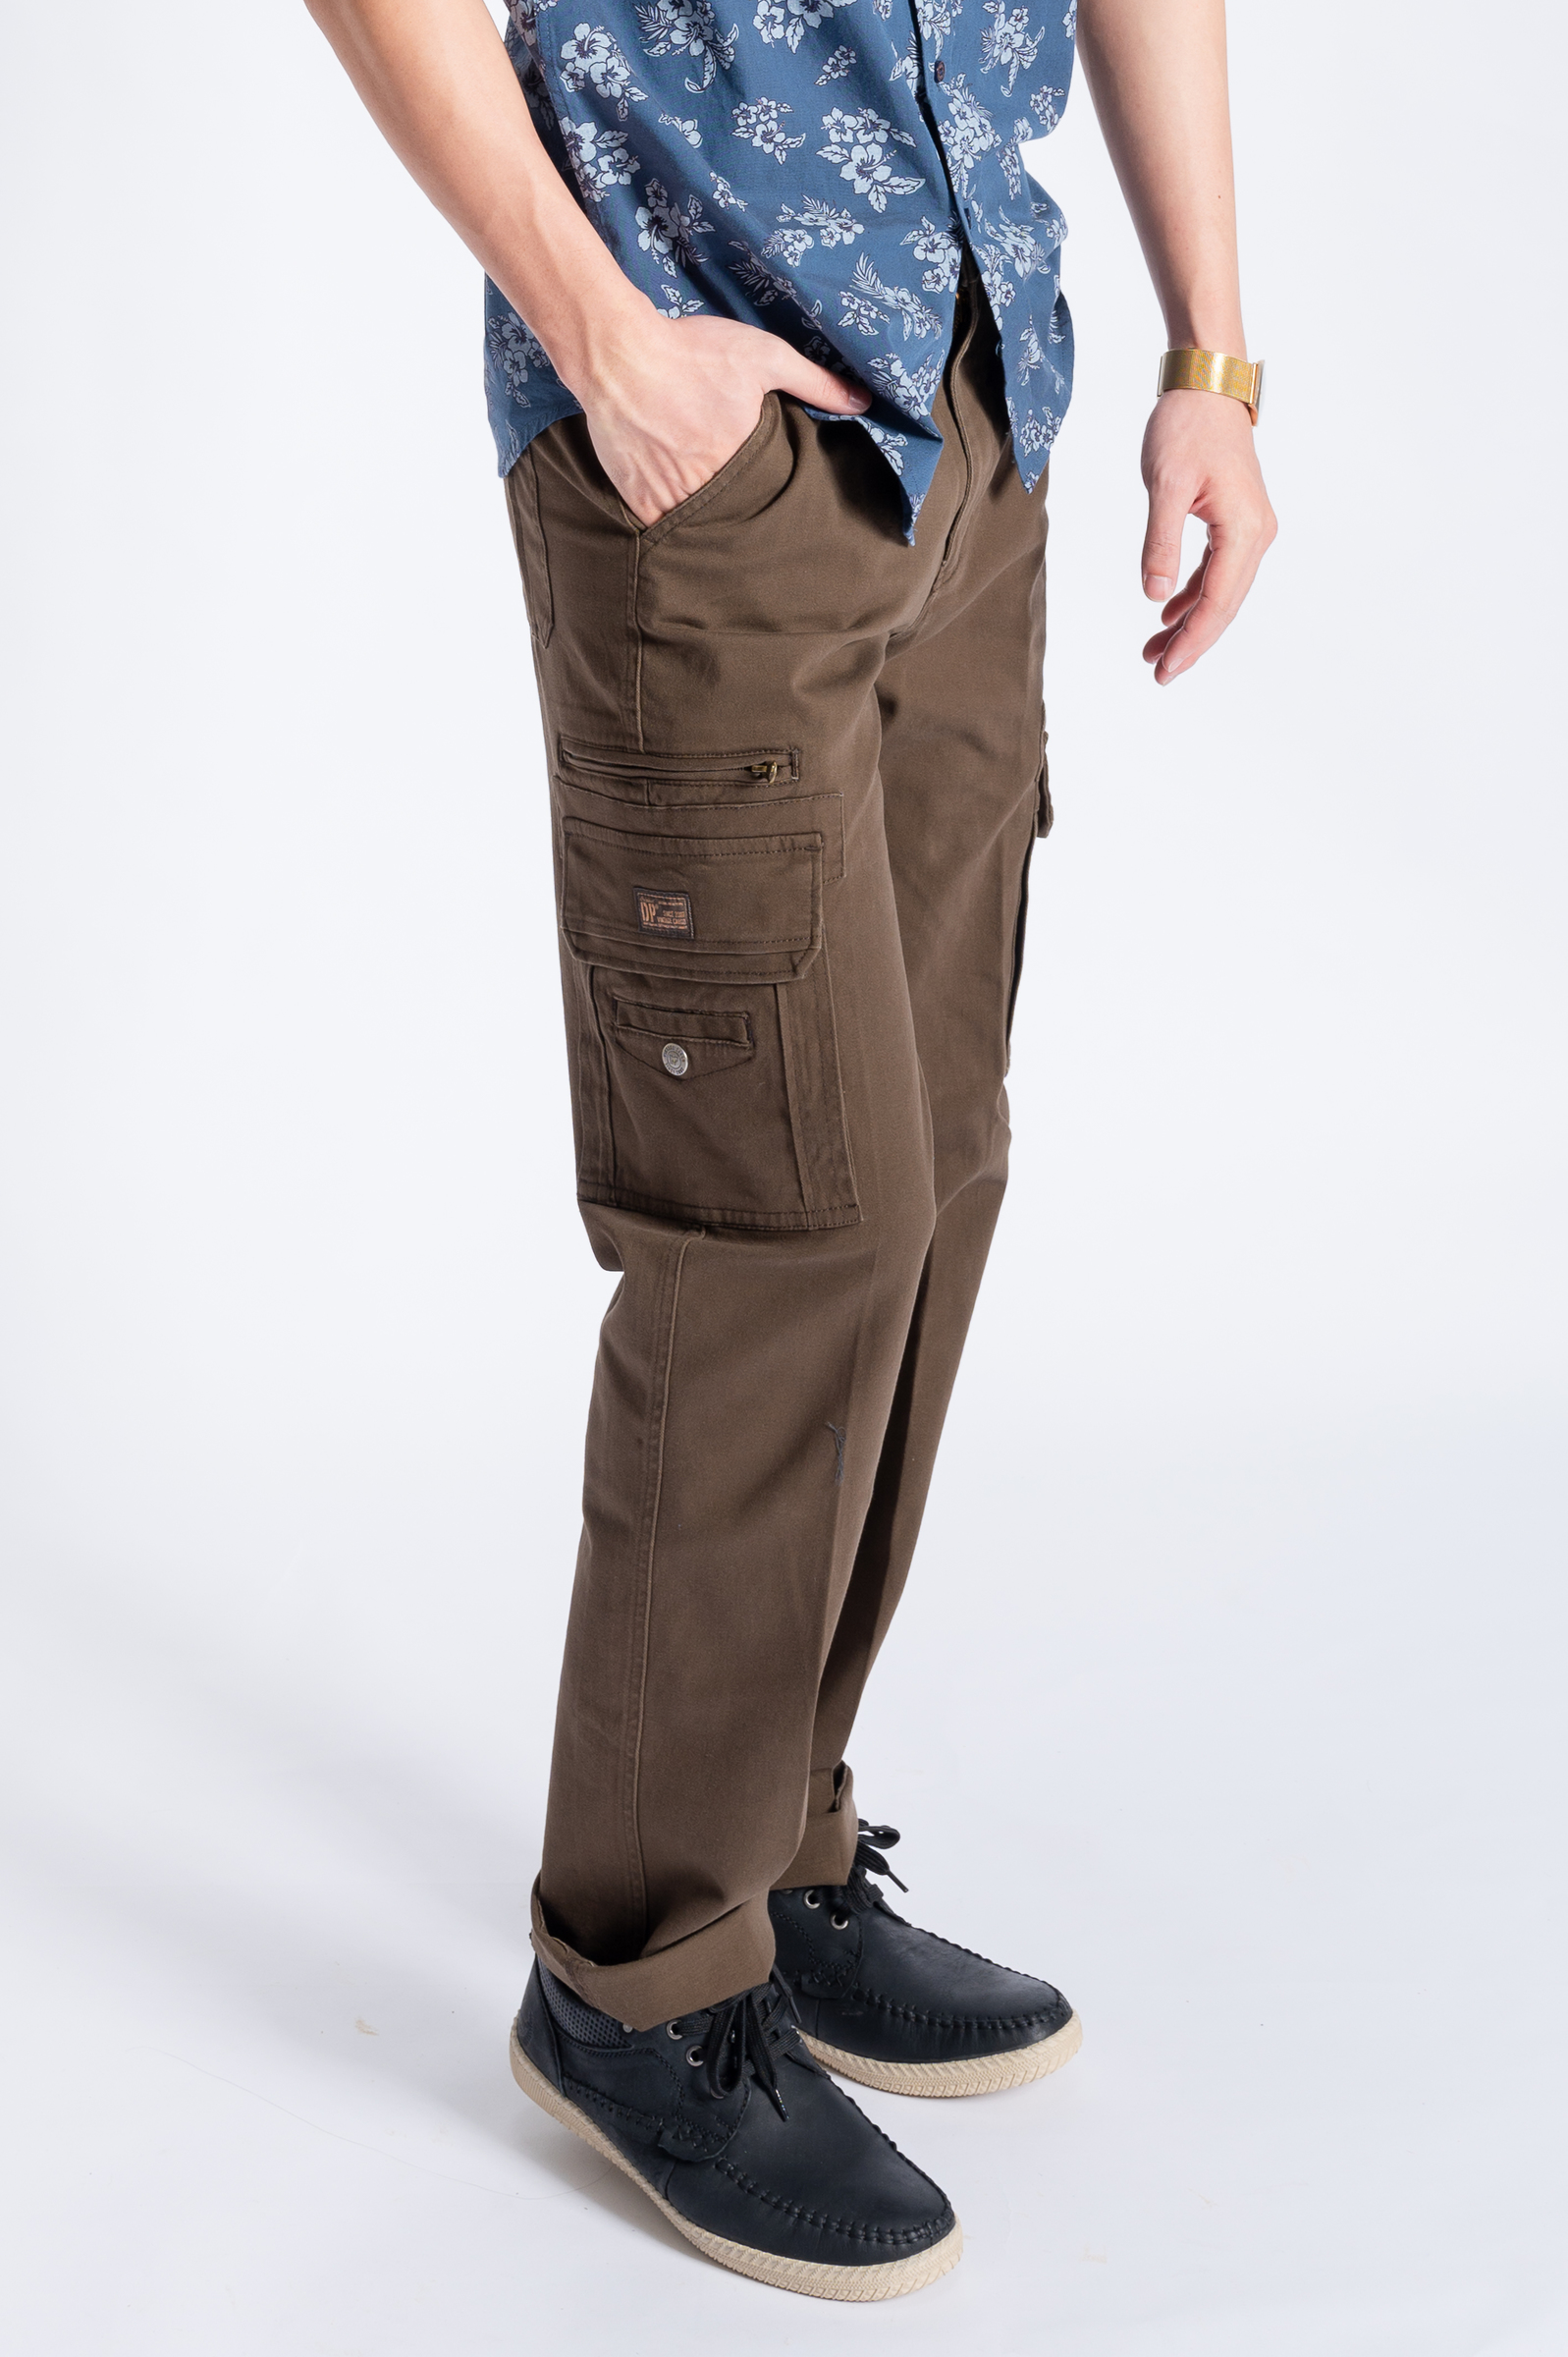 How To Elevate Your Casual Look With Stylish Cargo Pants - BelleTag